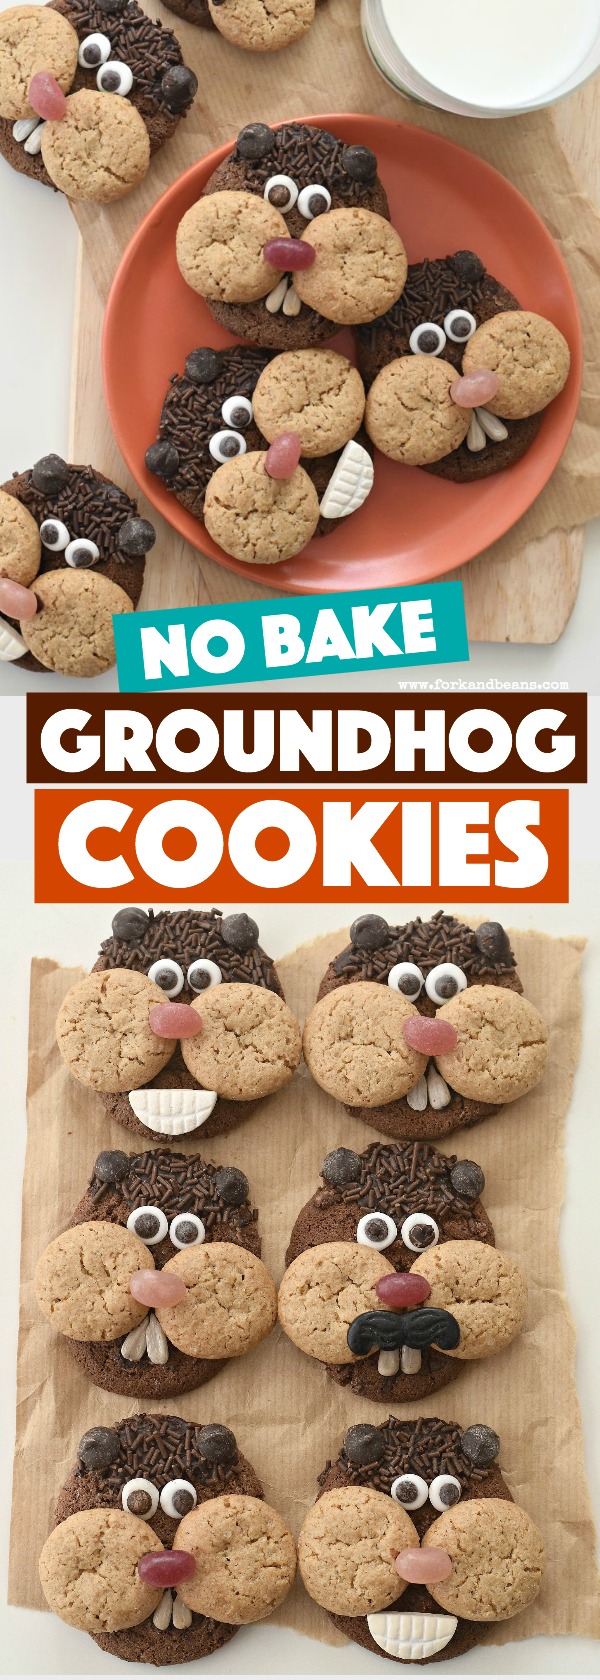 Groundhog Day Cookies Fork And Beans